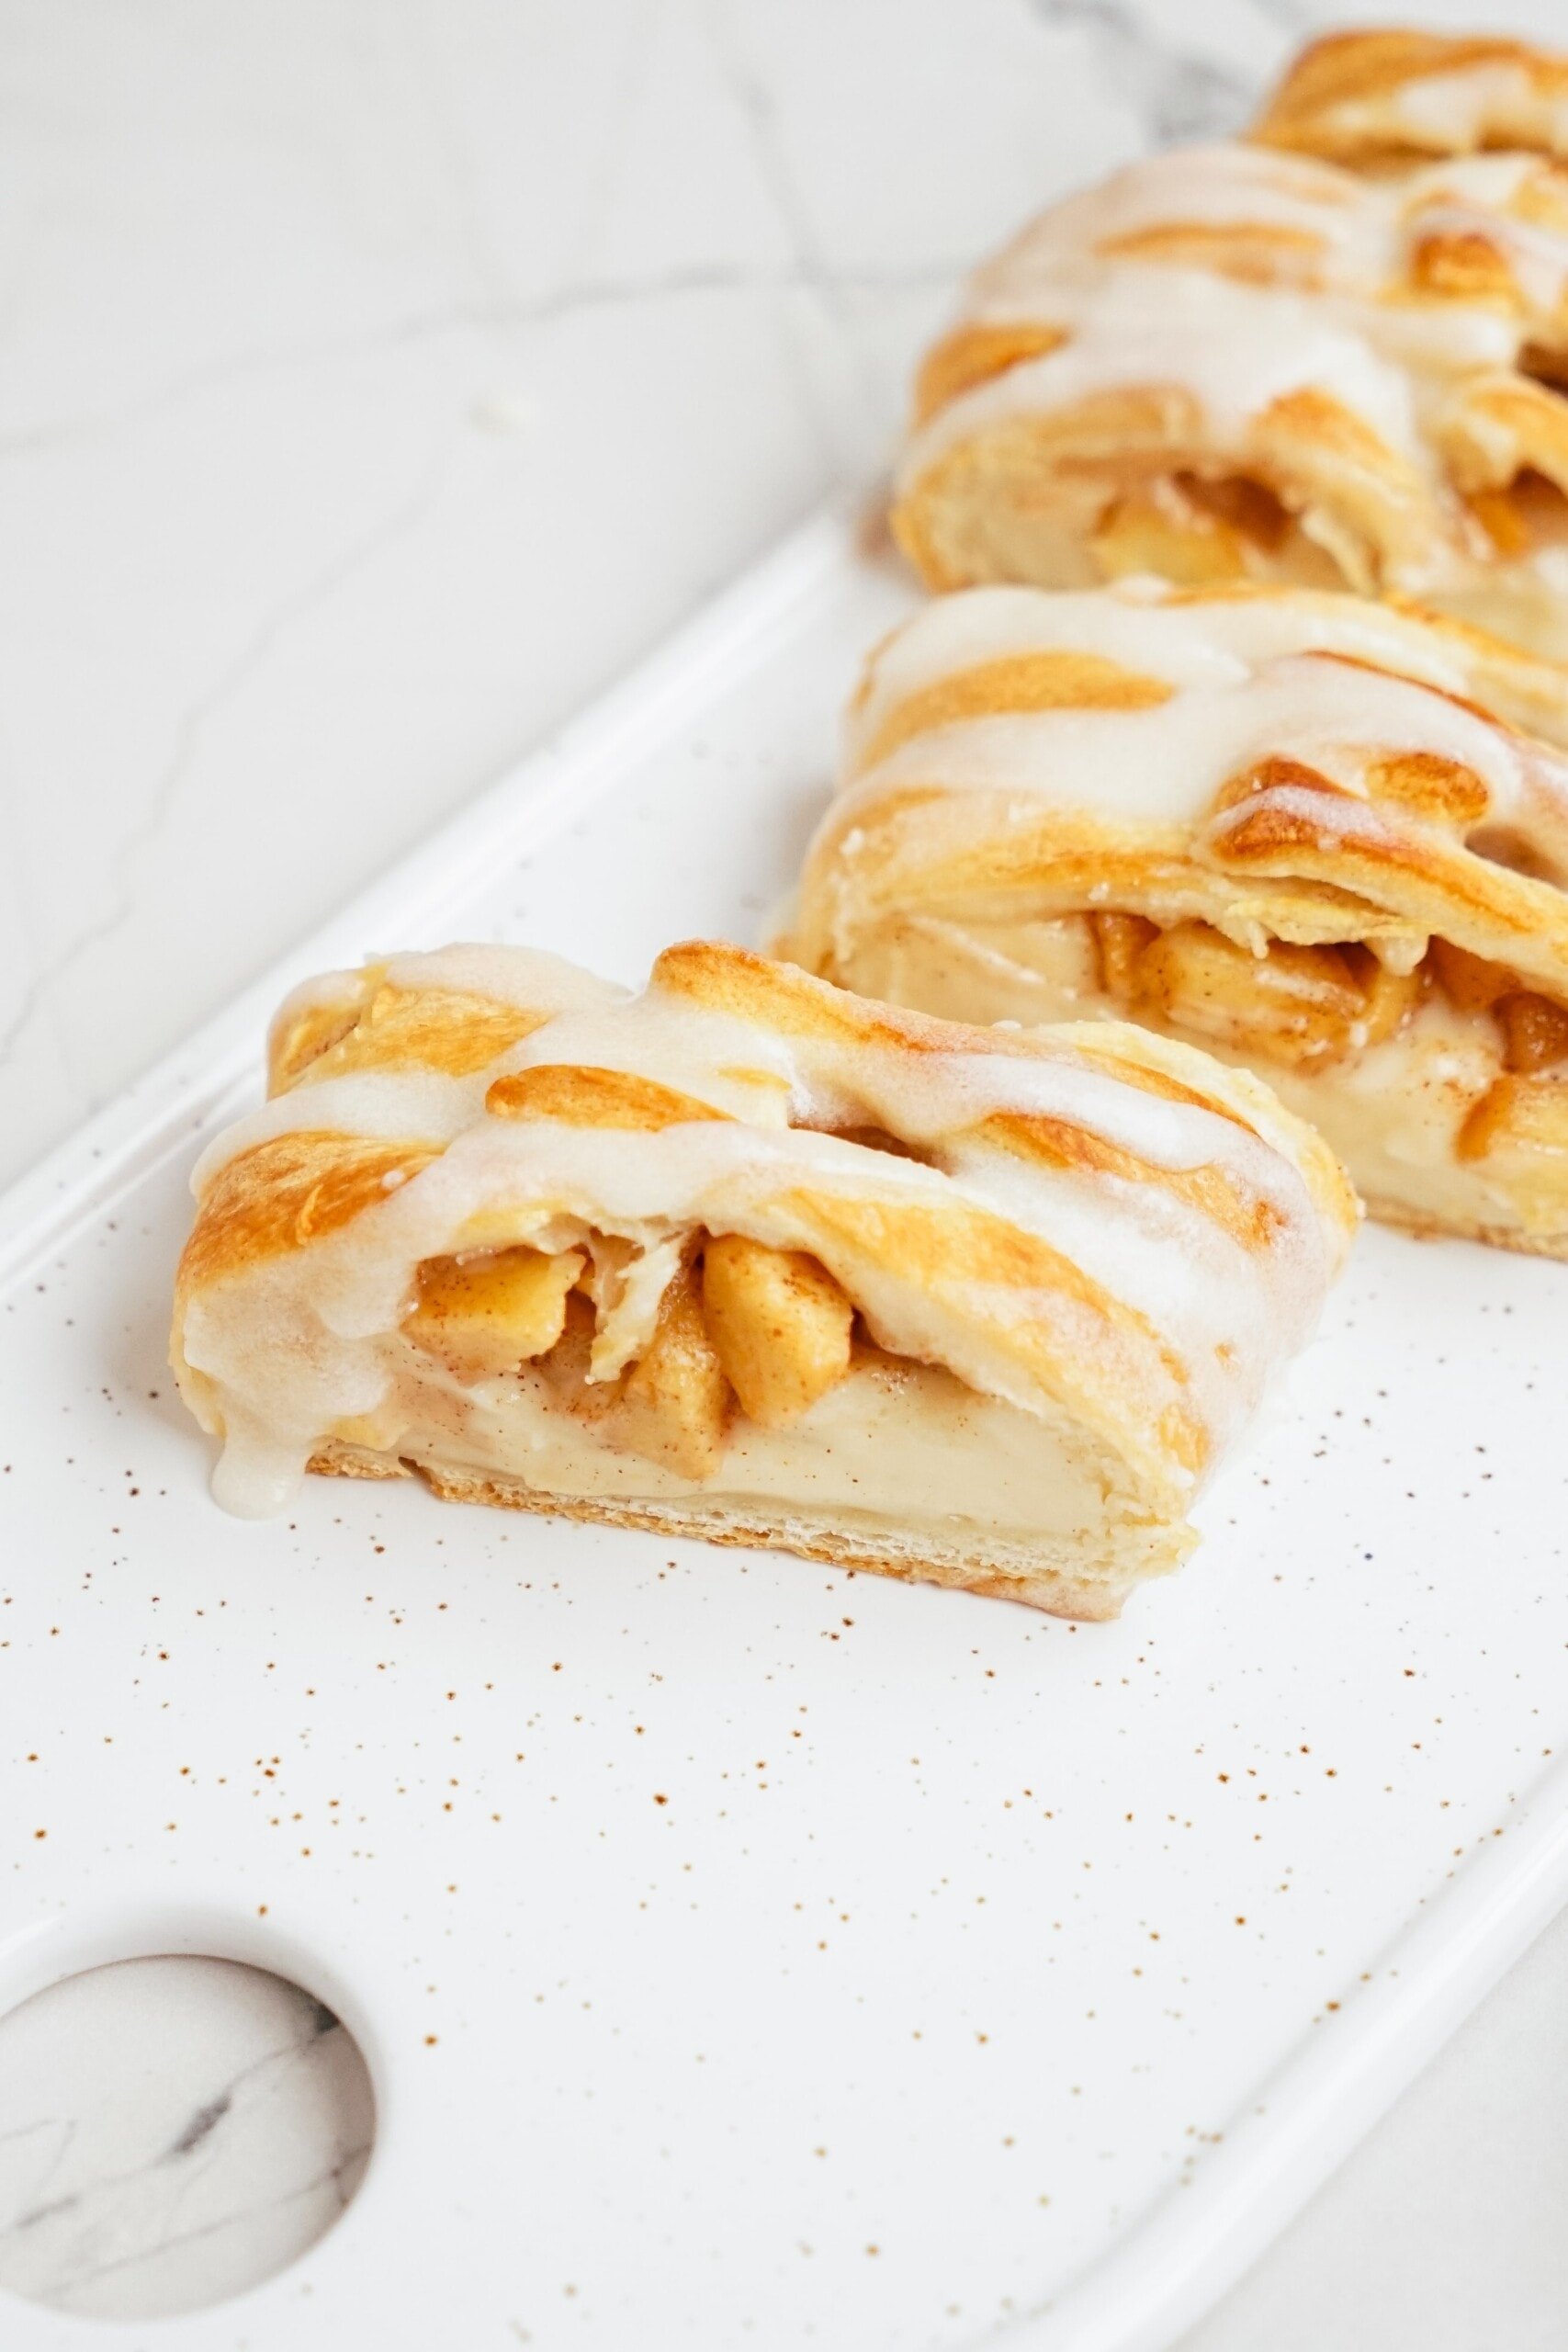 cut apple danish pieces on a serving plate